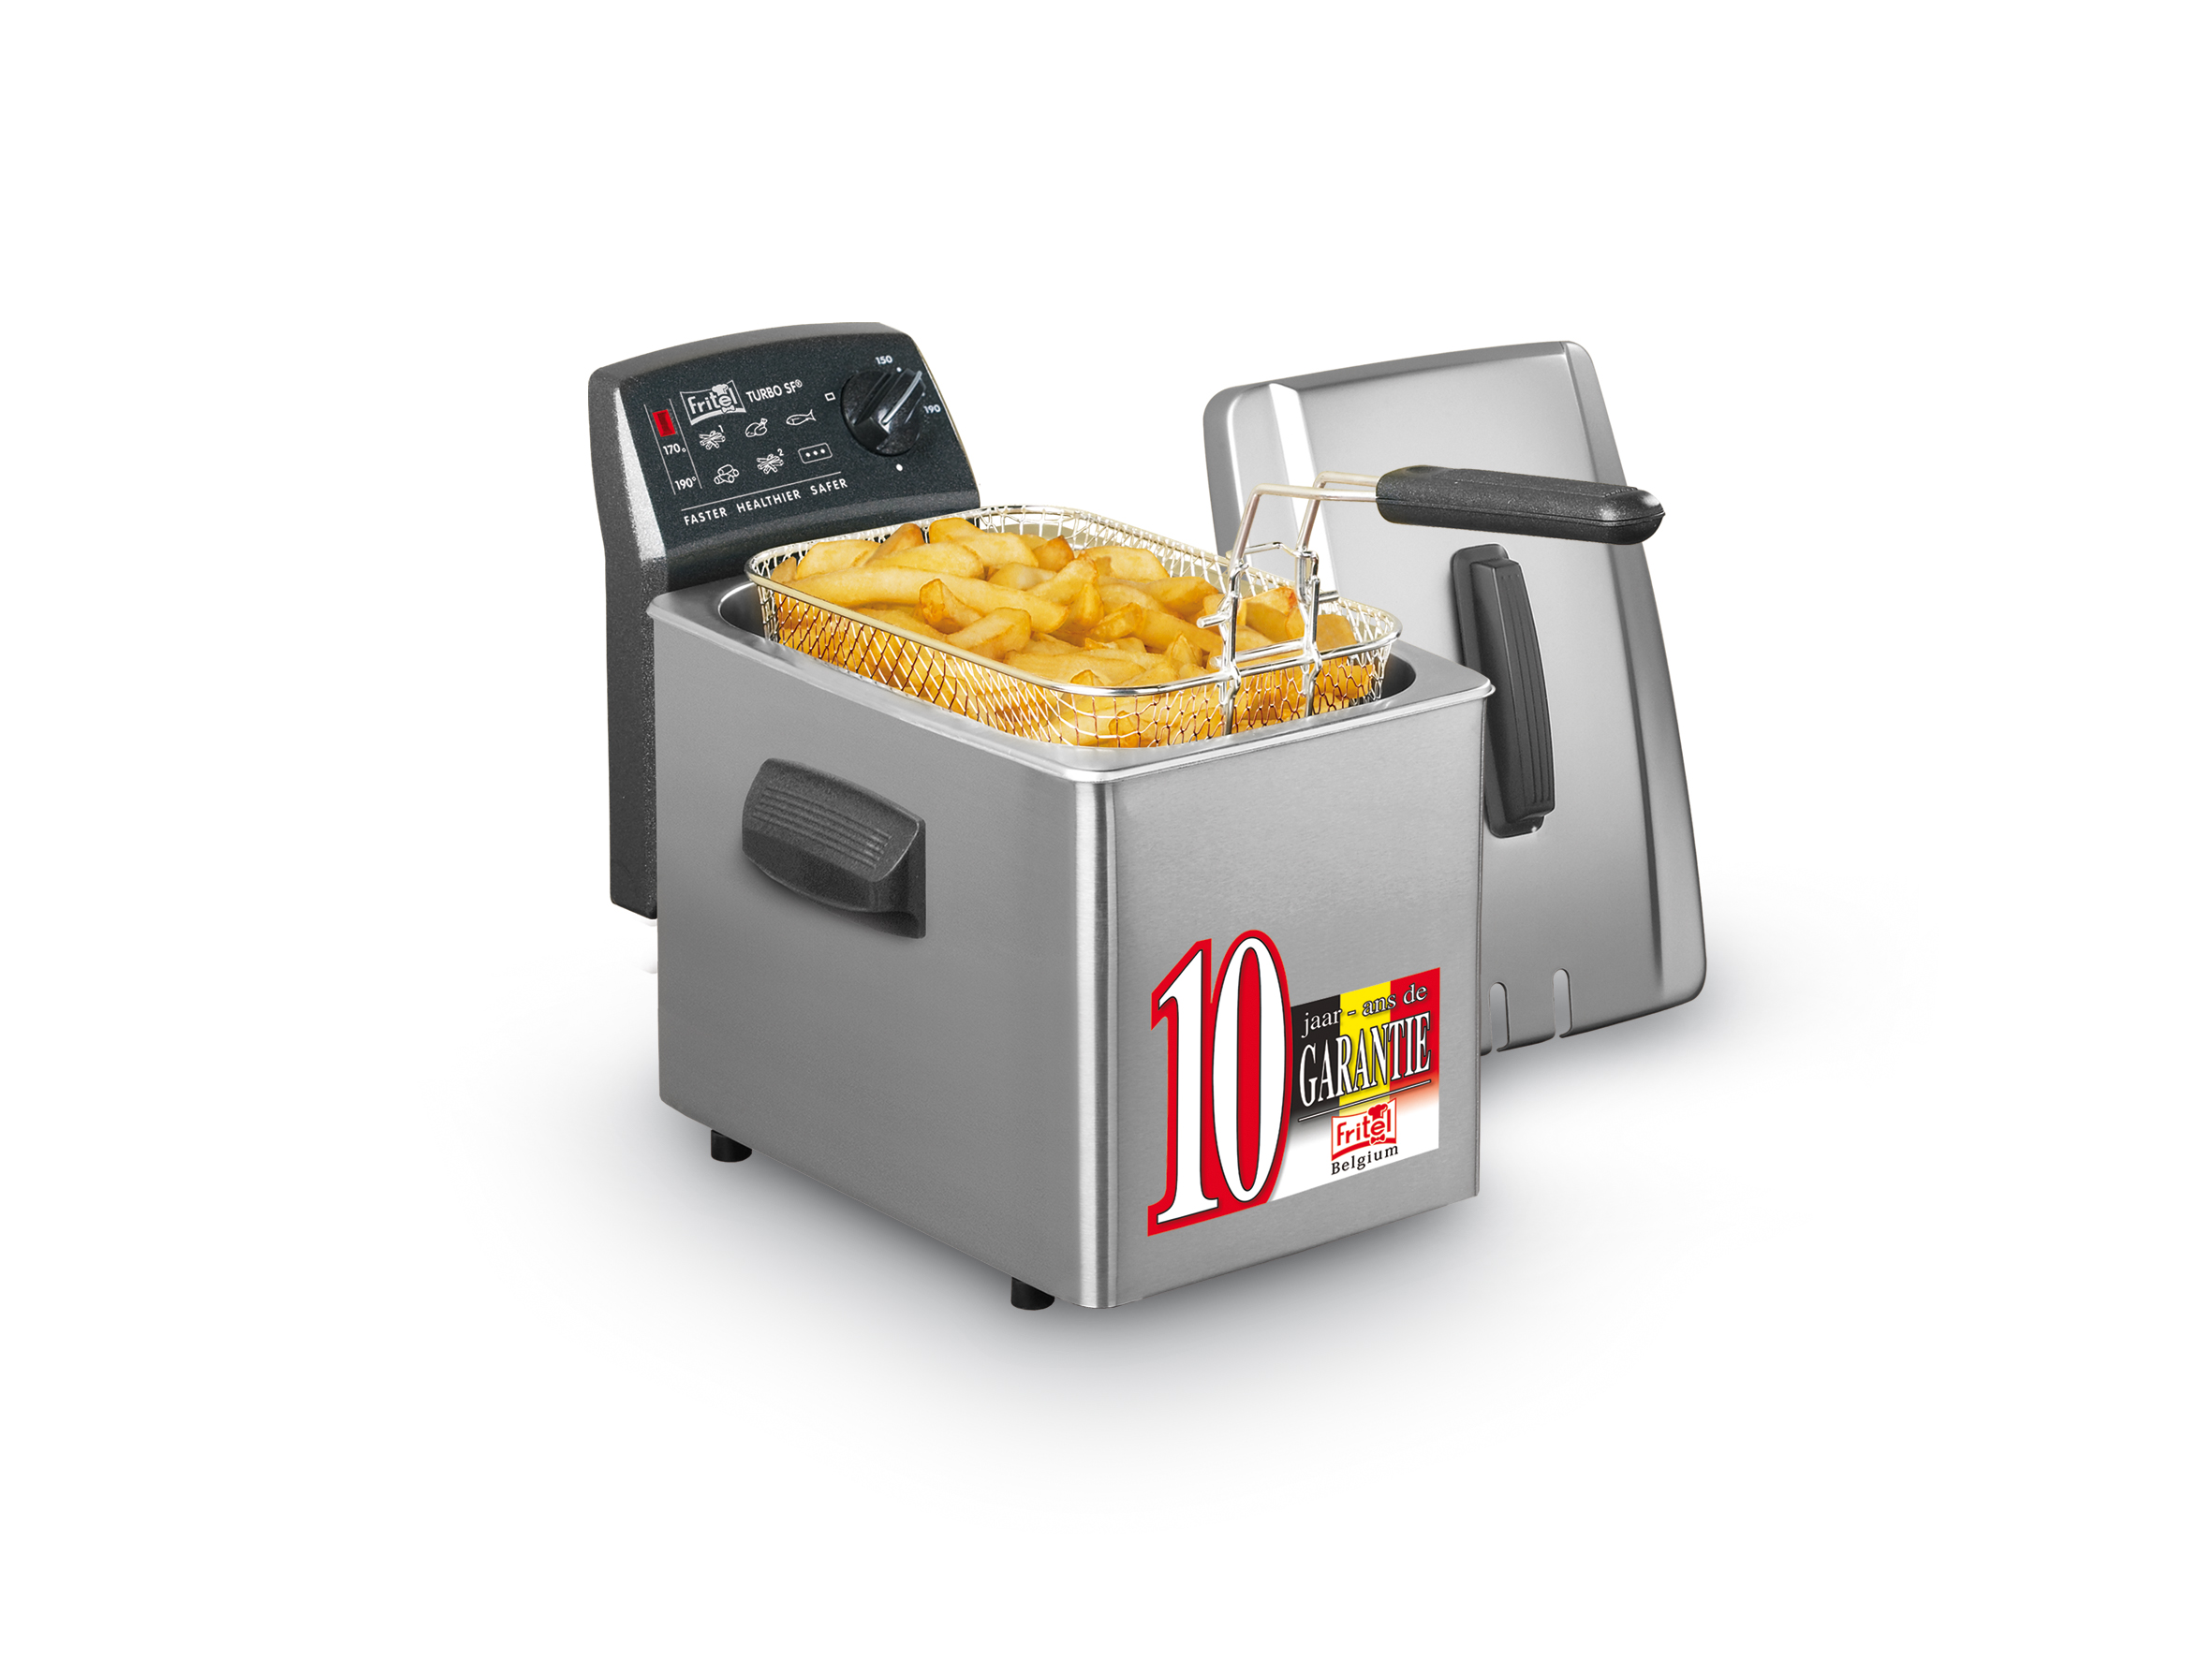 Image of Fritel Friteuse SF4355 4.0L, 3200W